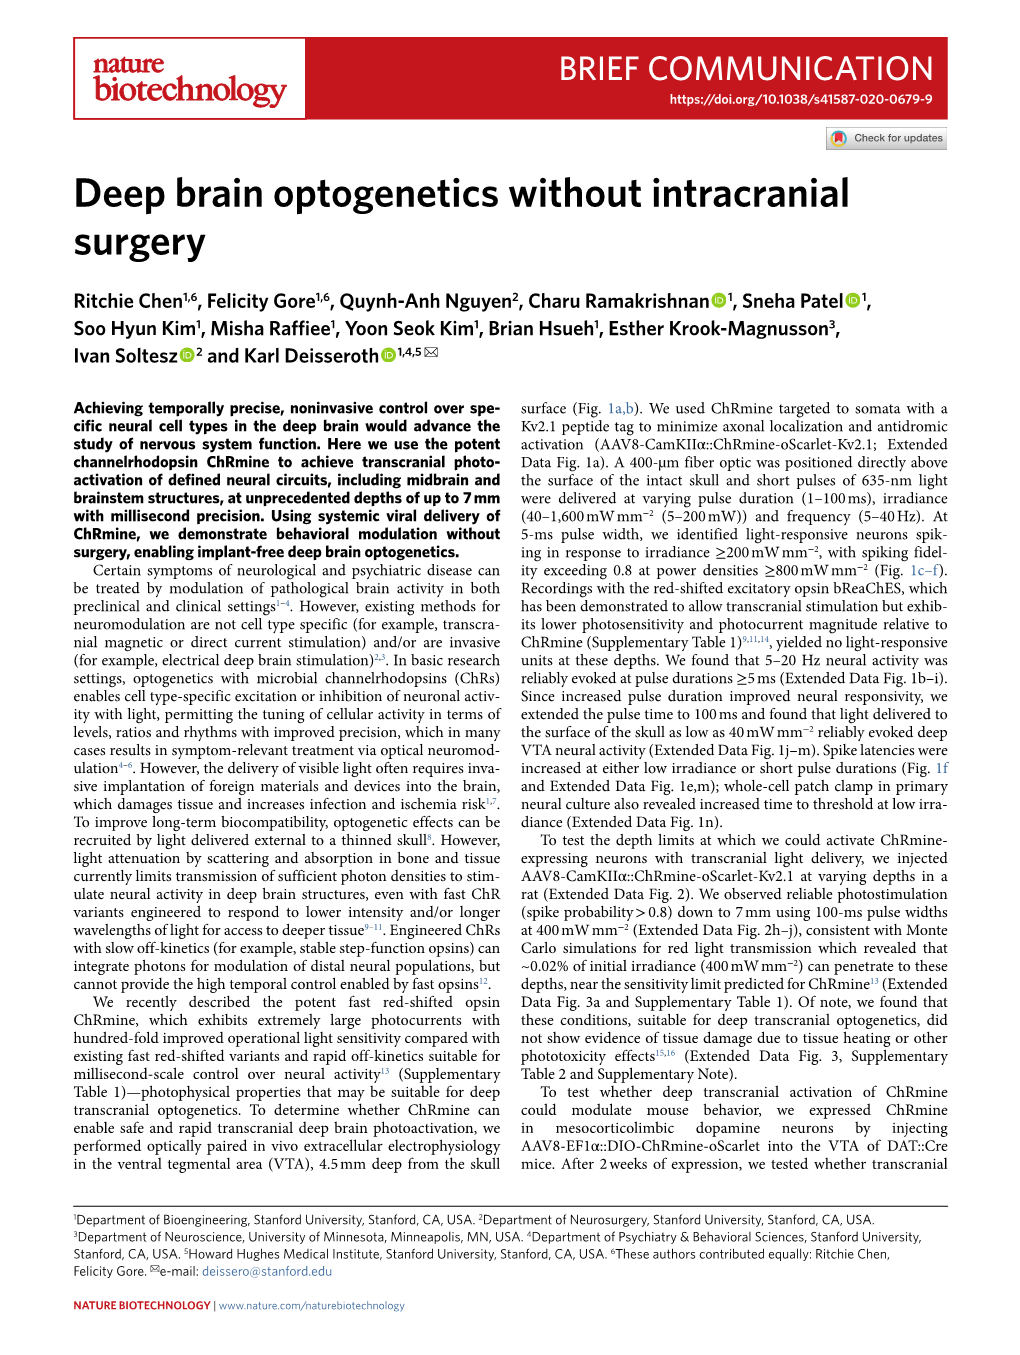 Deep Brain Optogenetics Without Intracranial Surgery